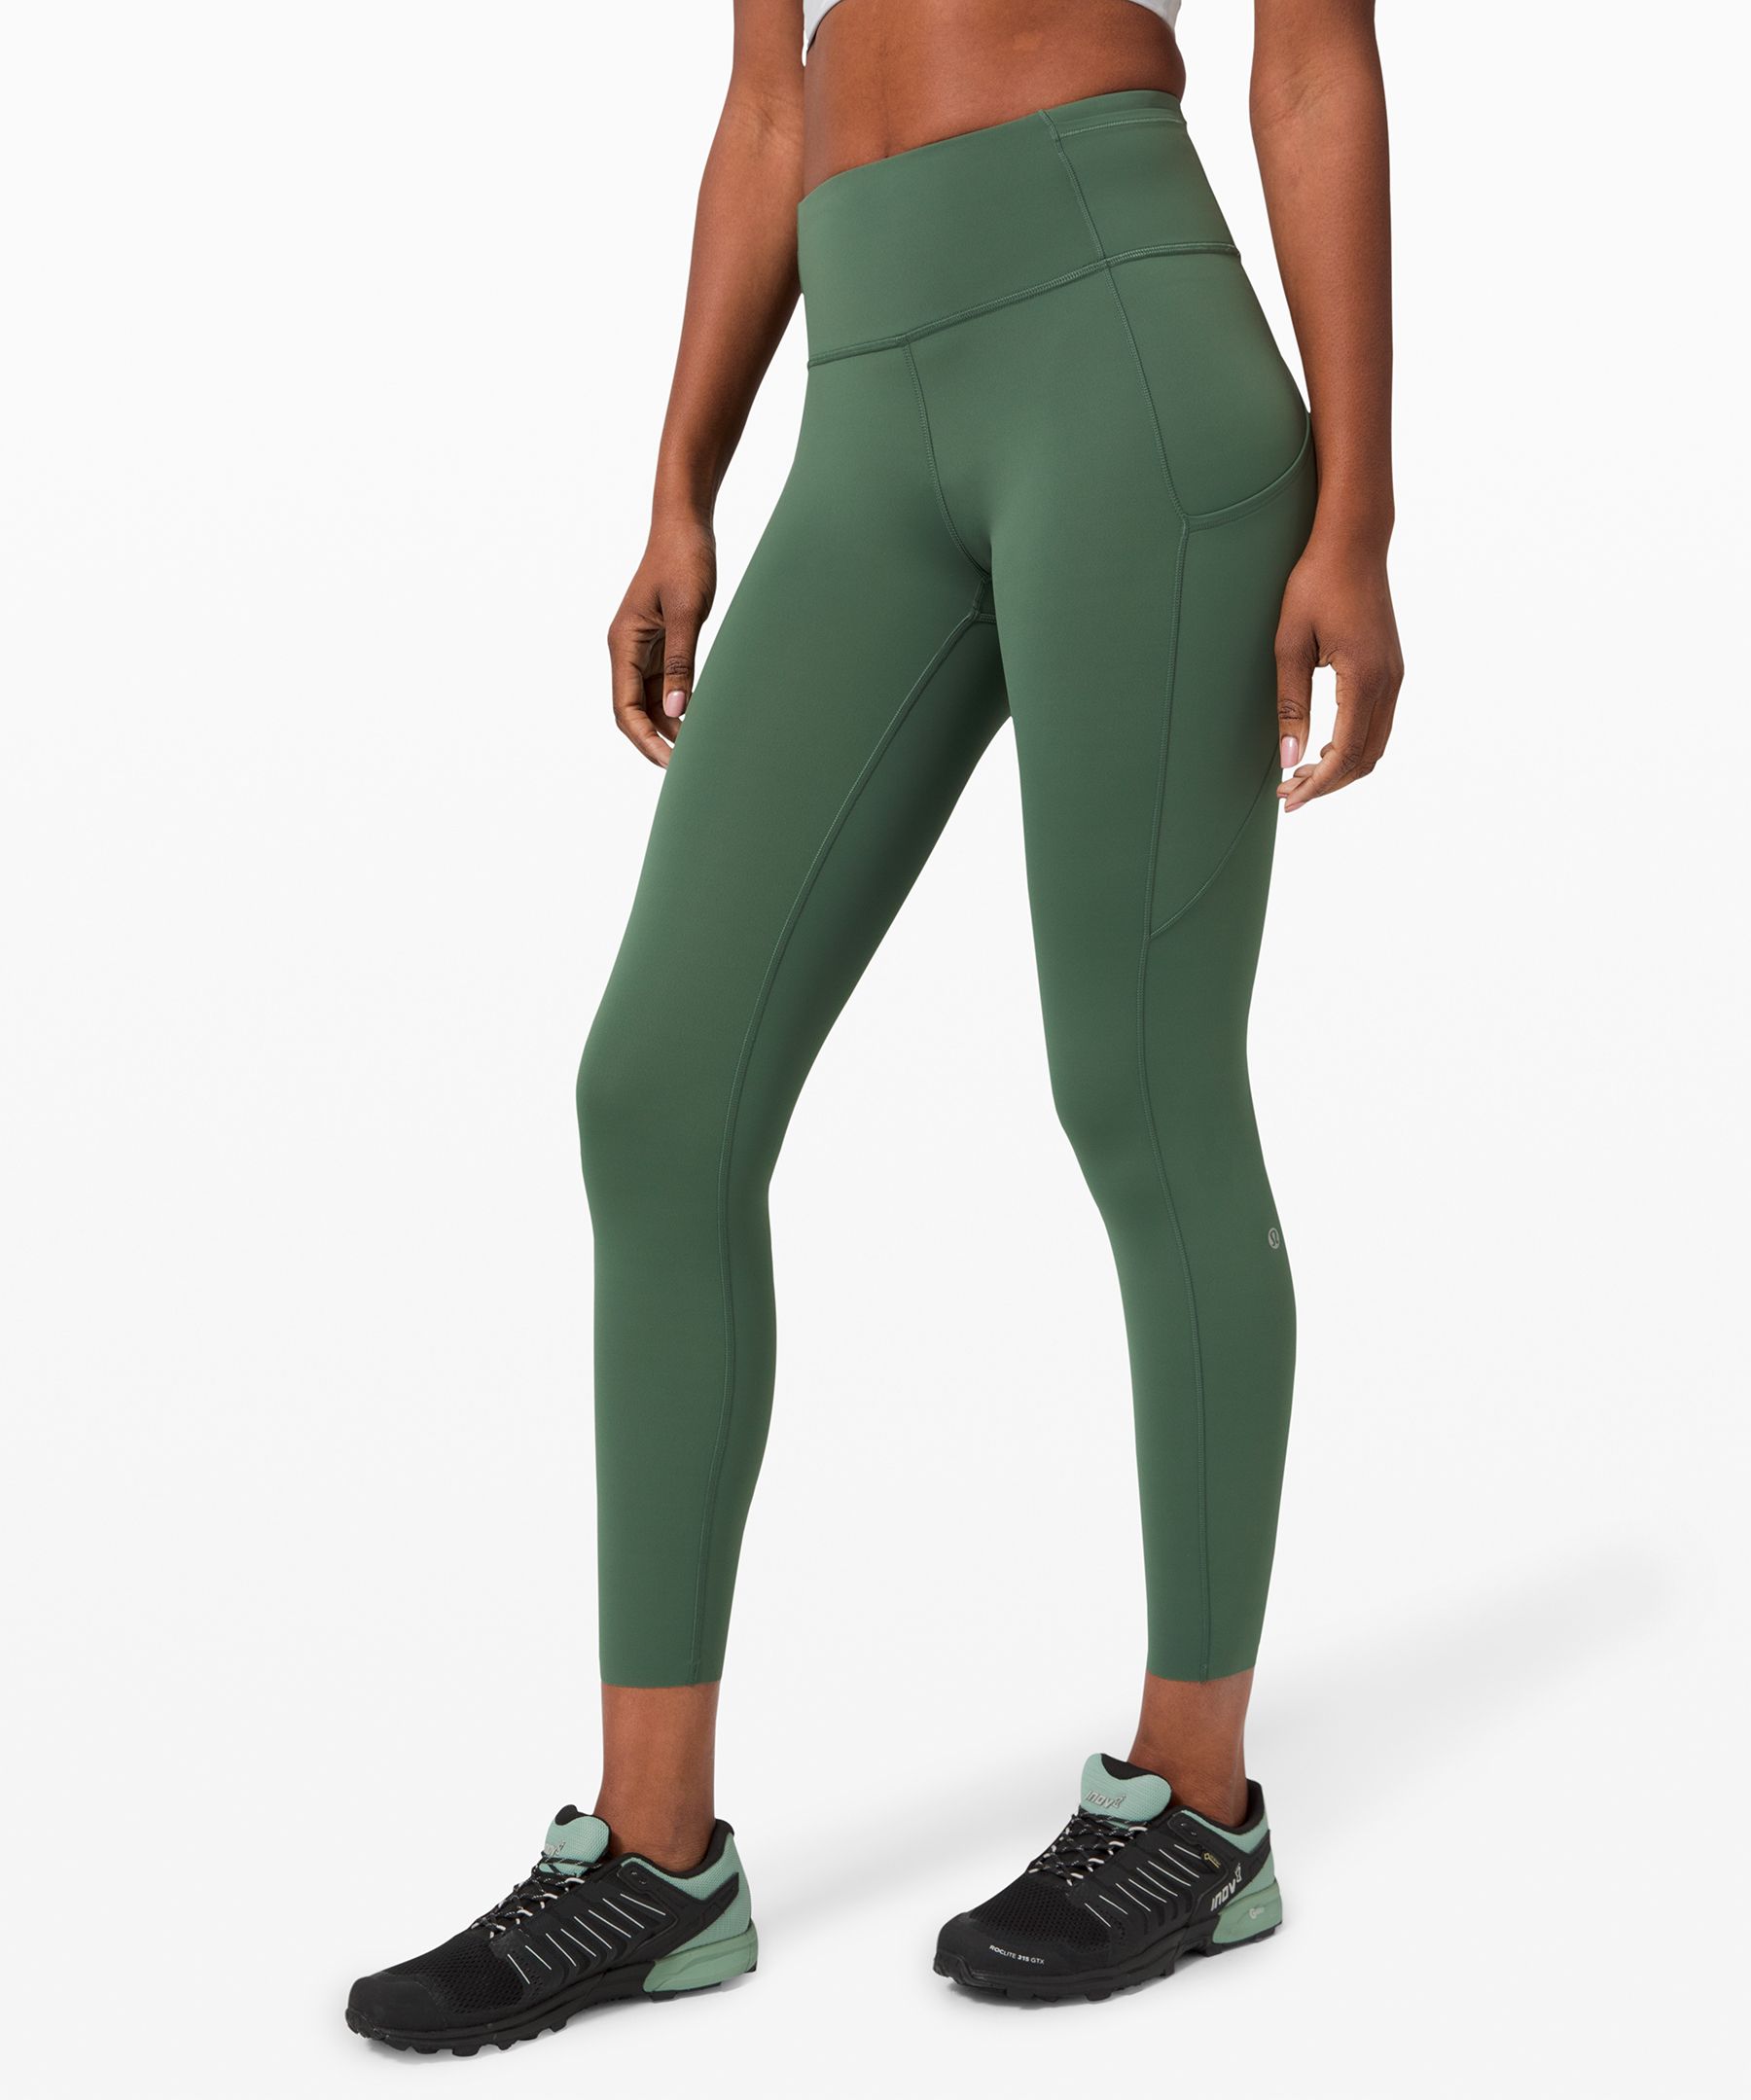 Lululemon Fast And Free Tight Ii 25 *non-reflective Nulux In